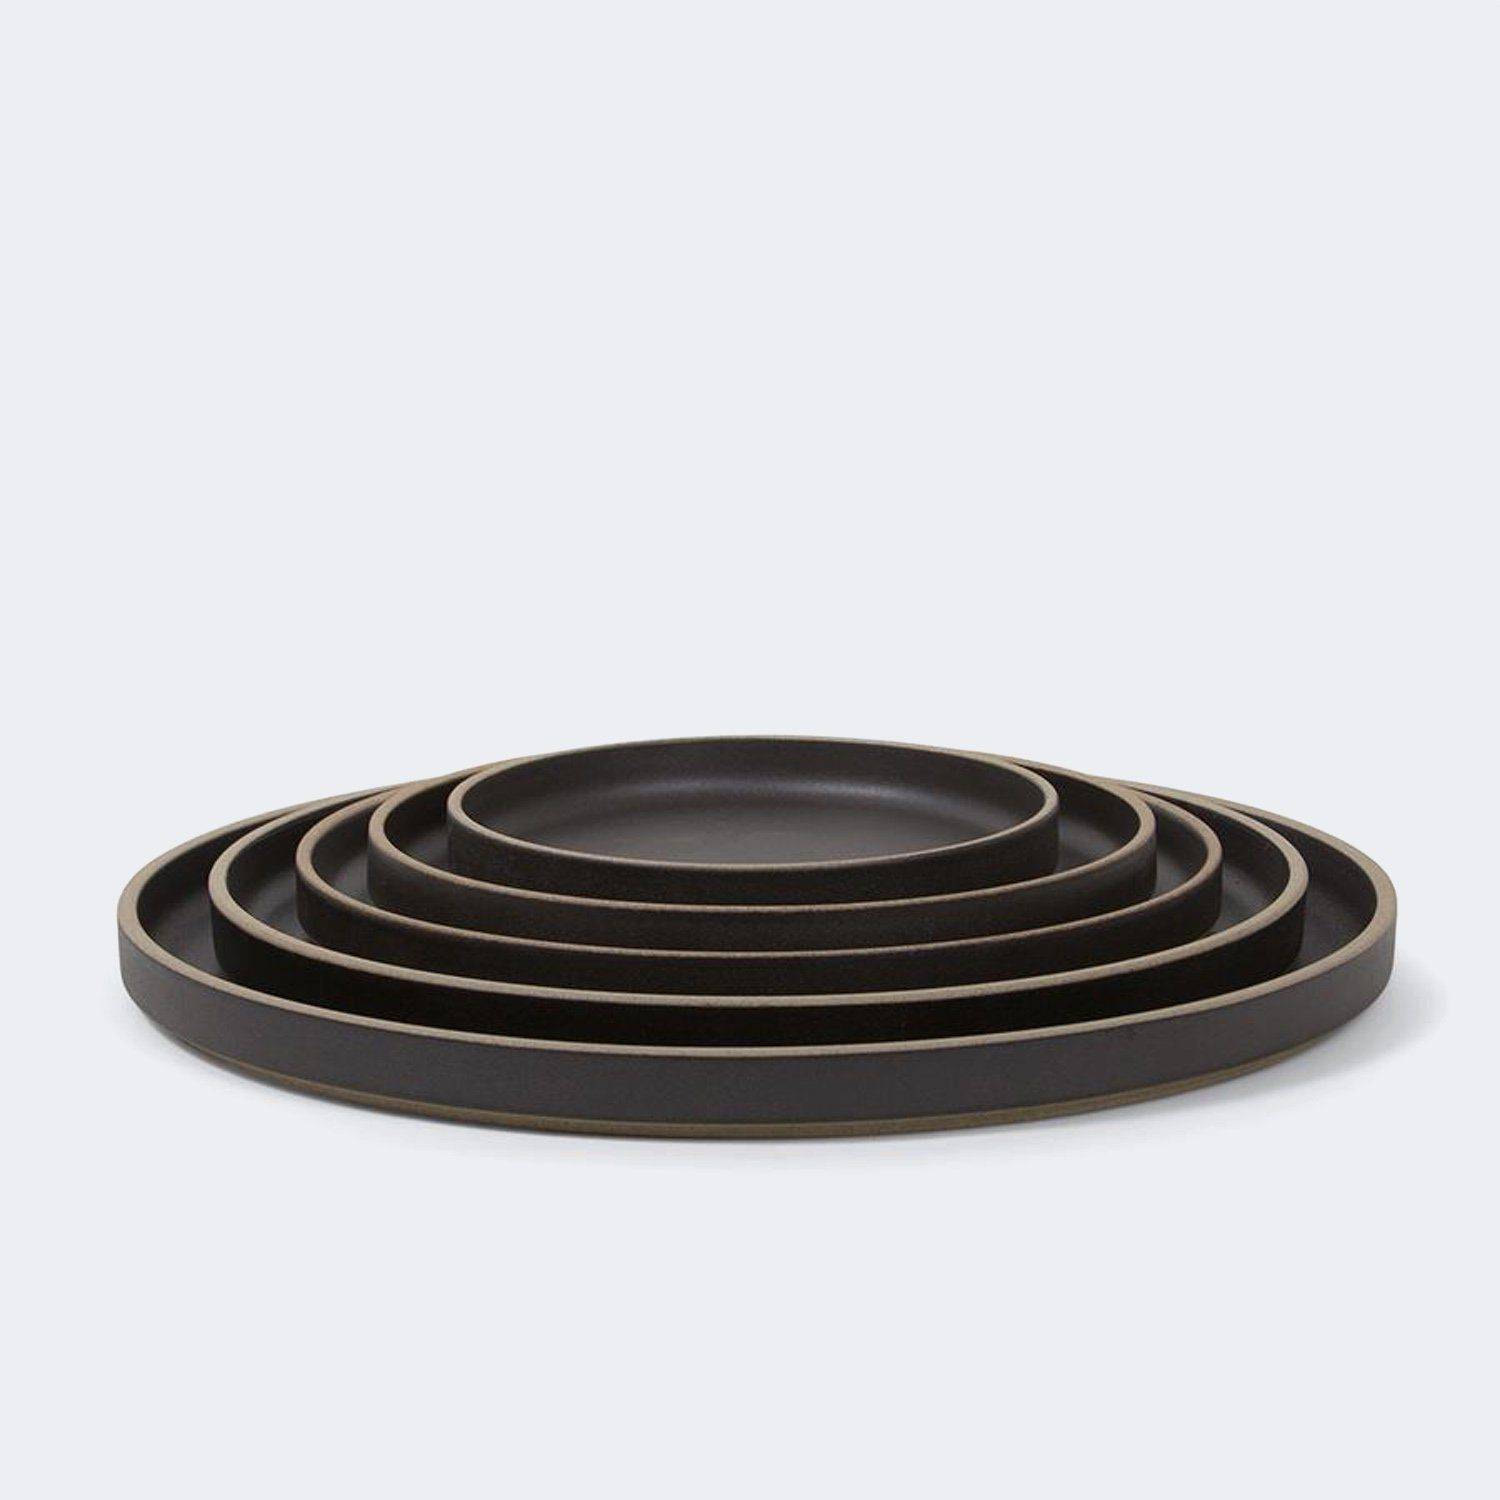 Hasami Porcelain Plate in Black - KANSO